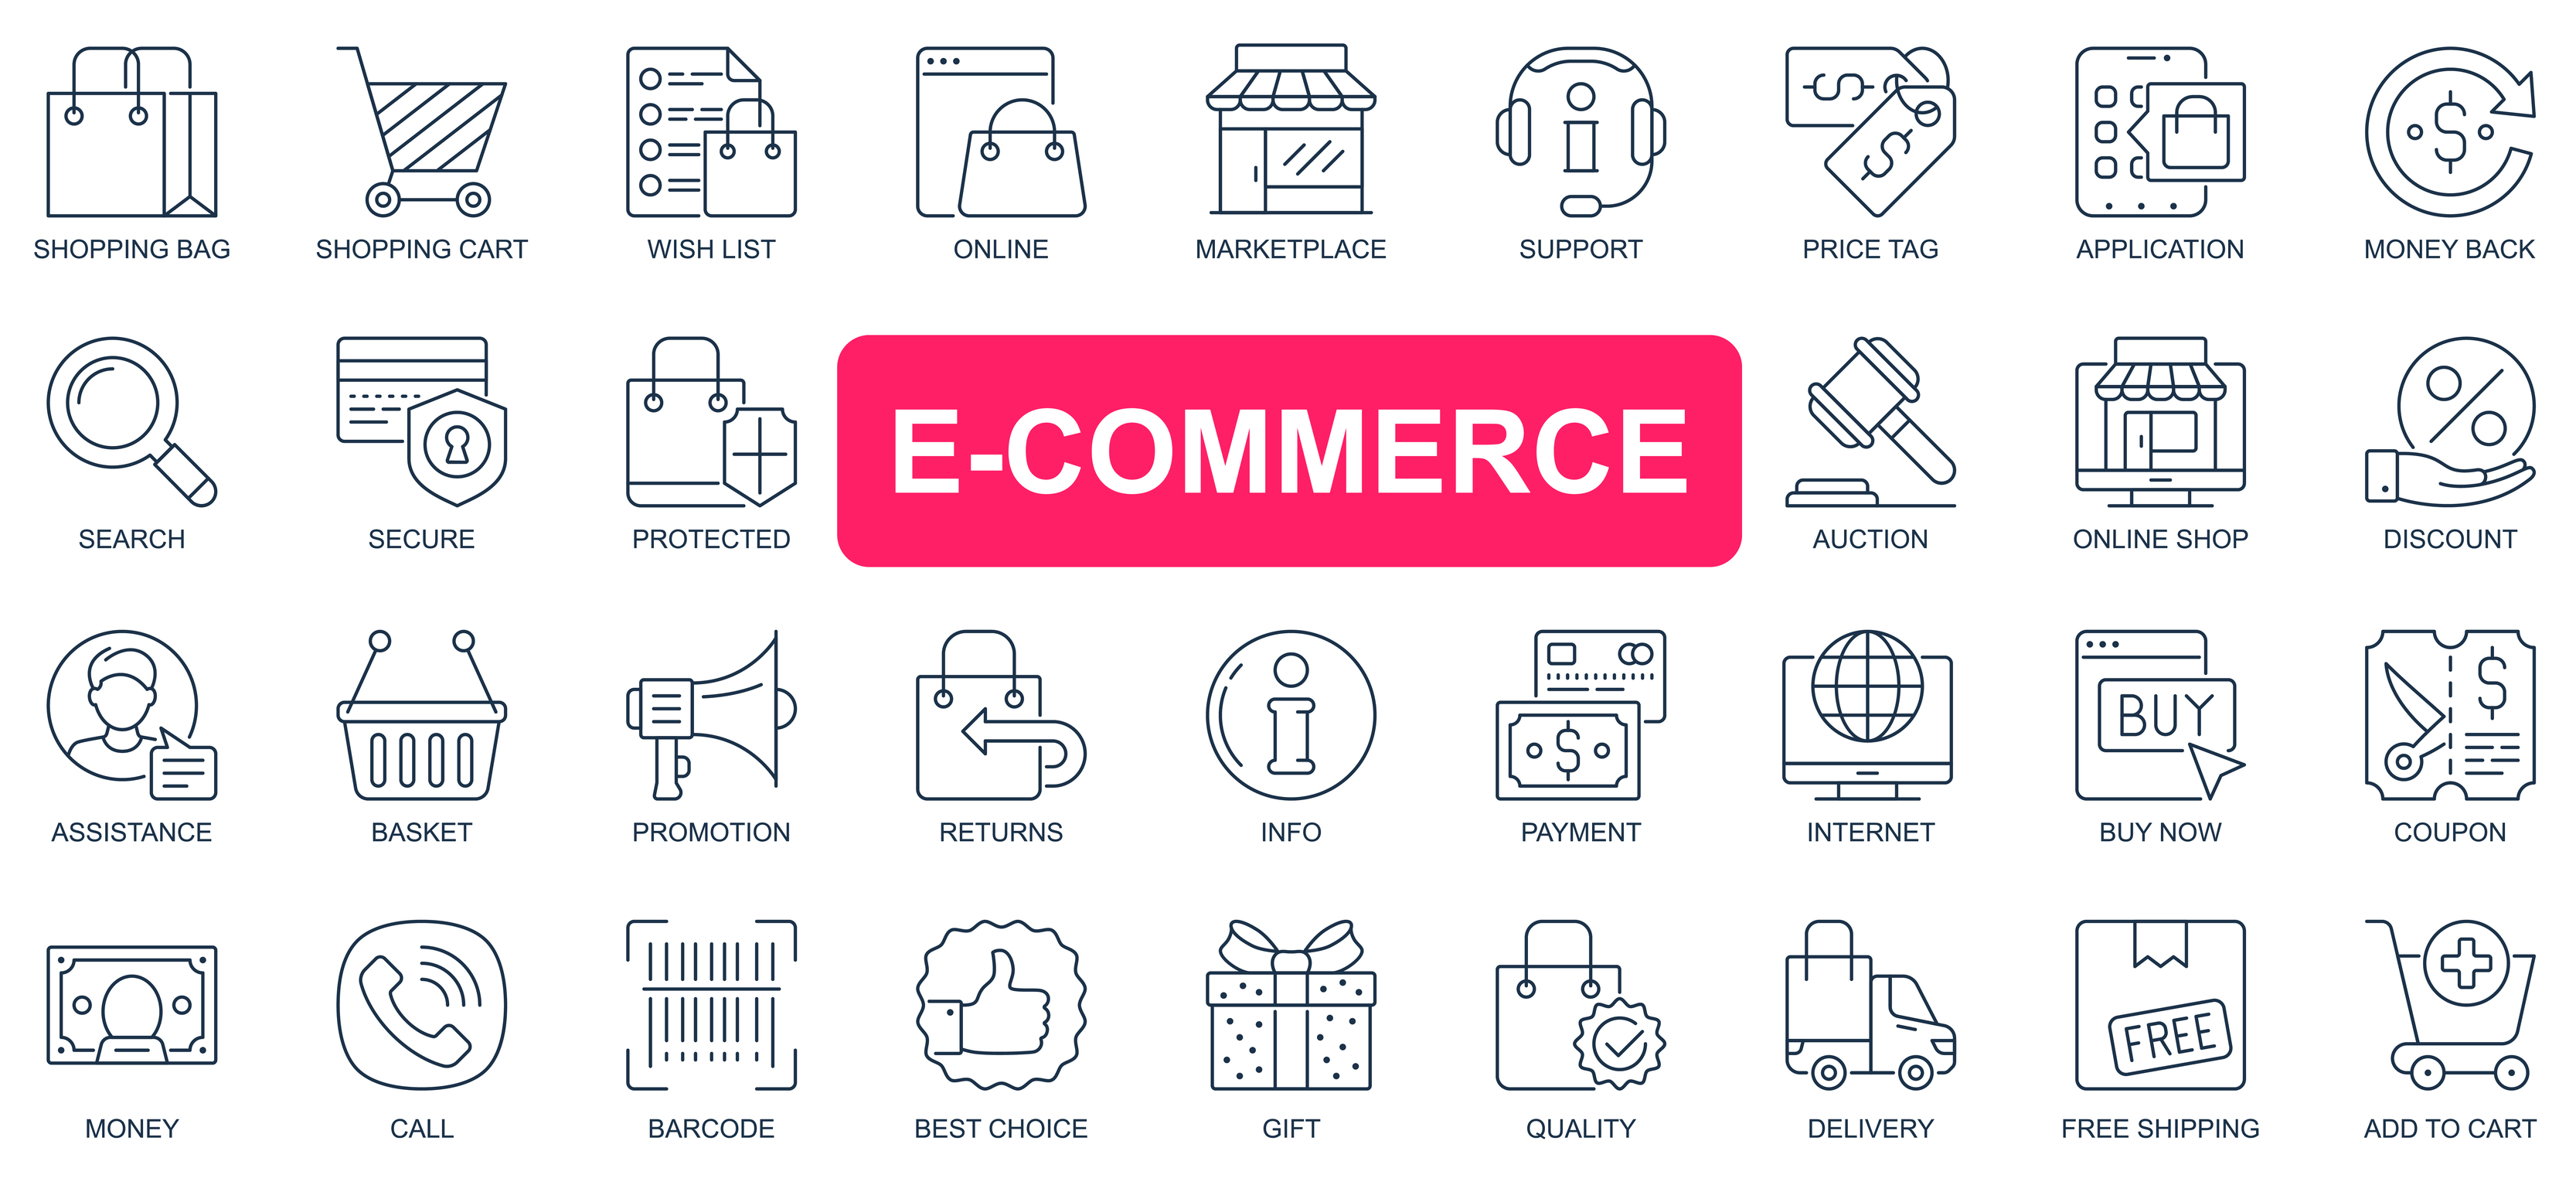 Price tag - Free commerce and shopping icons